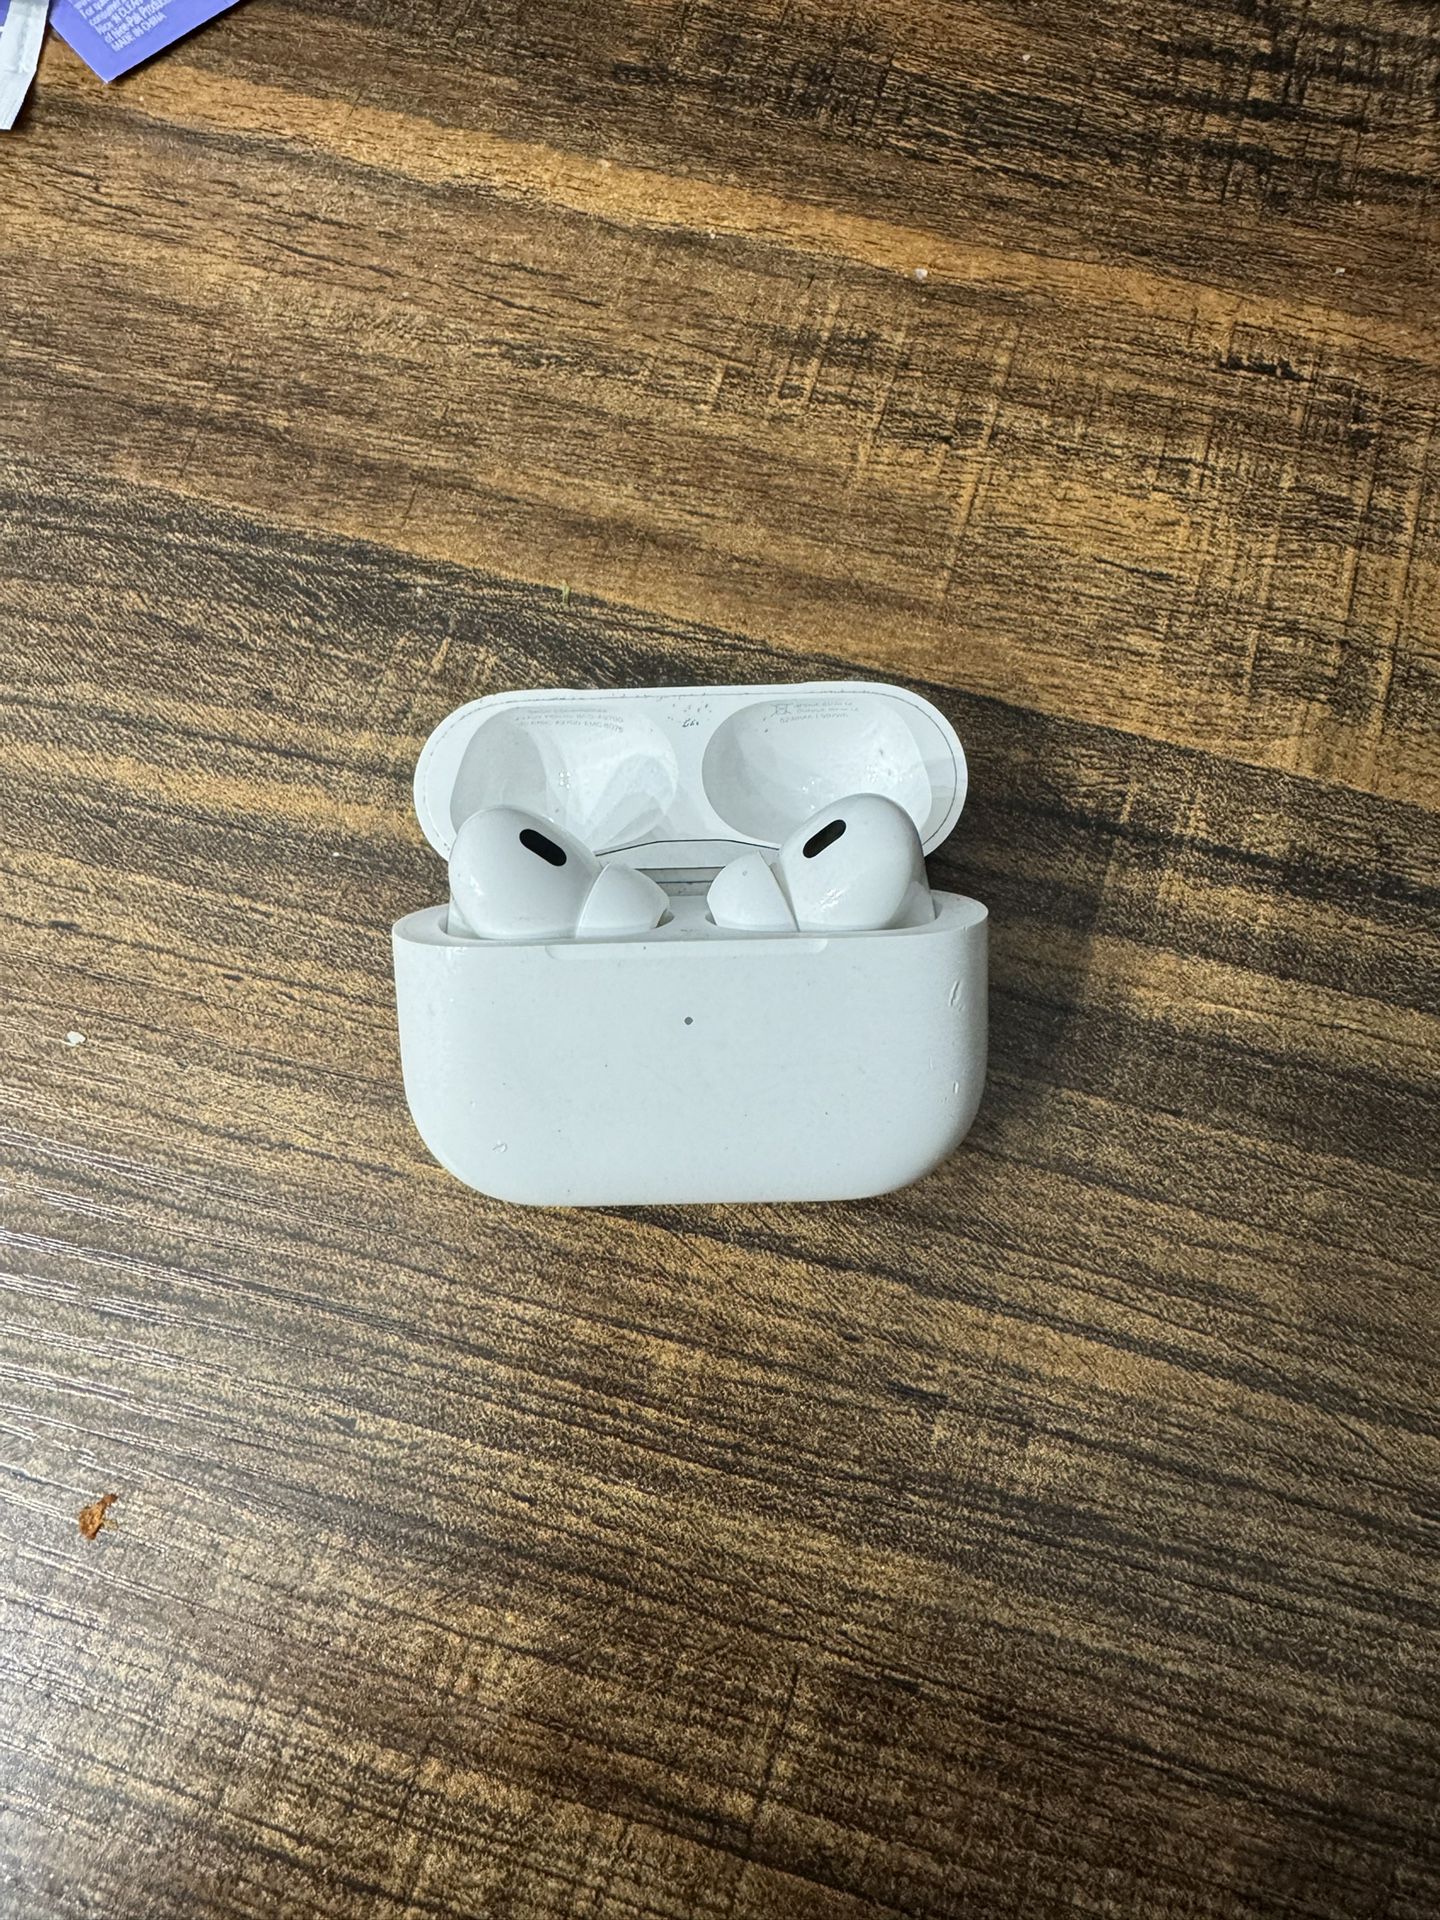 AirPod Pro Used